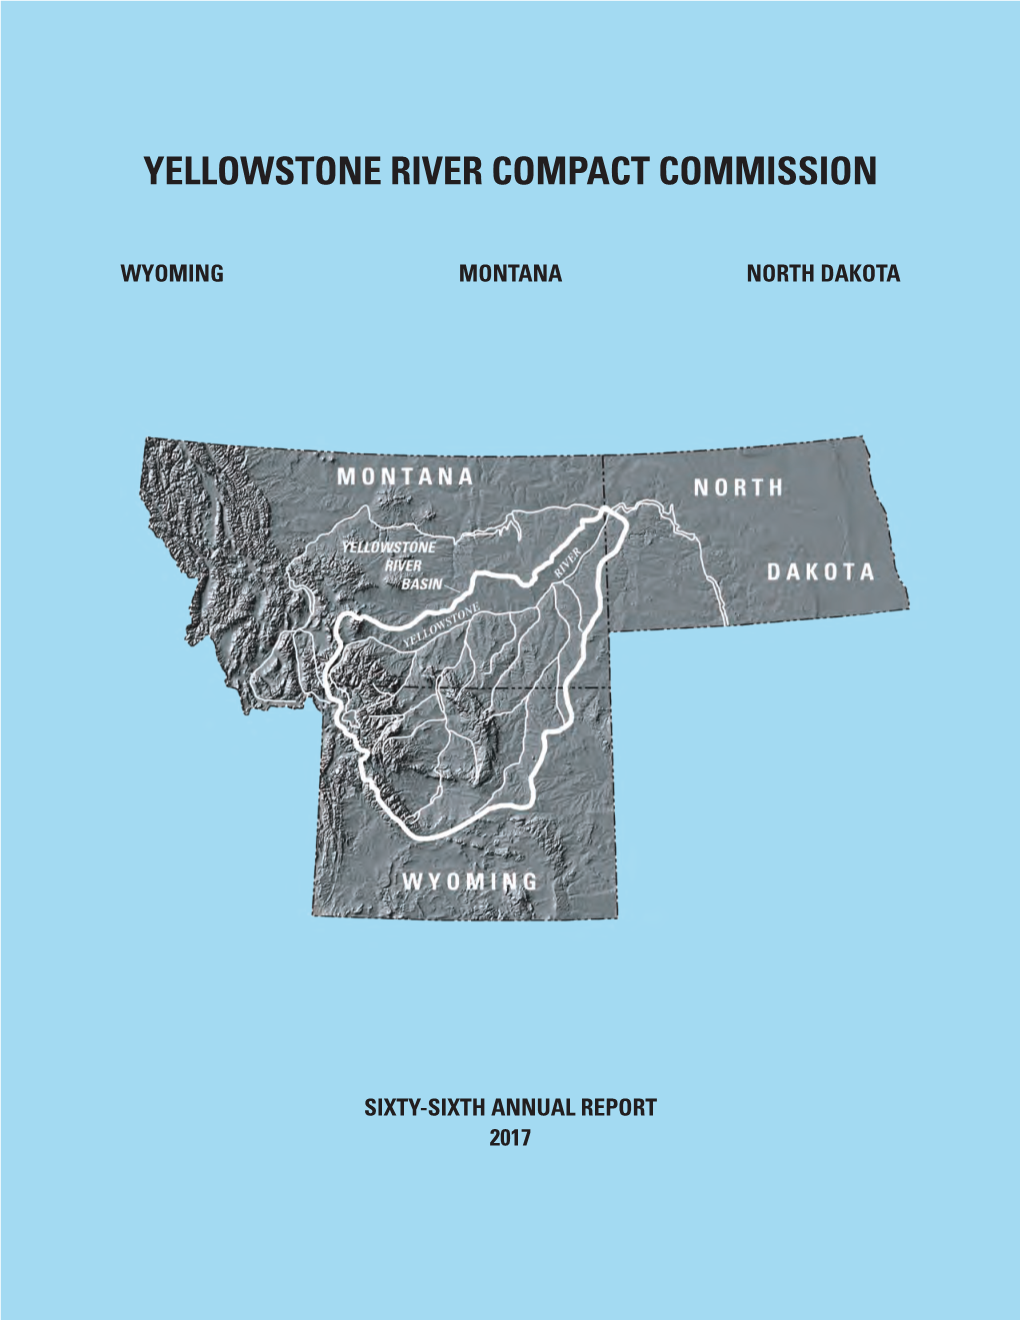 Yellowstone River Compact Commission Sixty-Sixth Annual